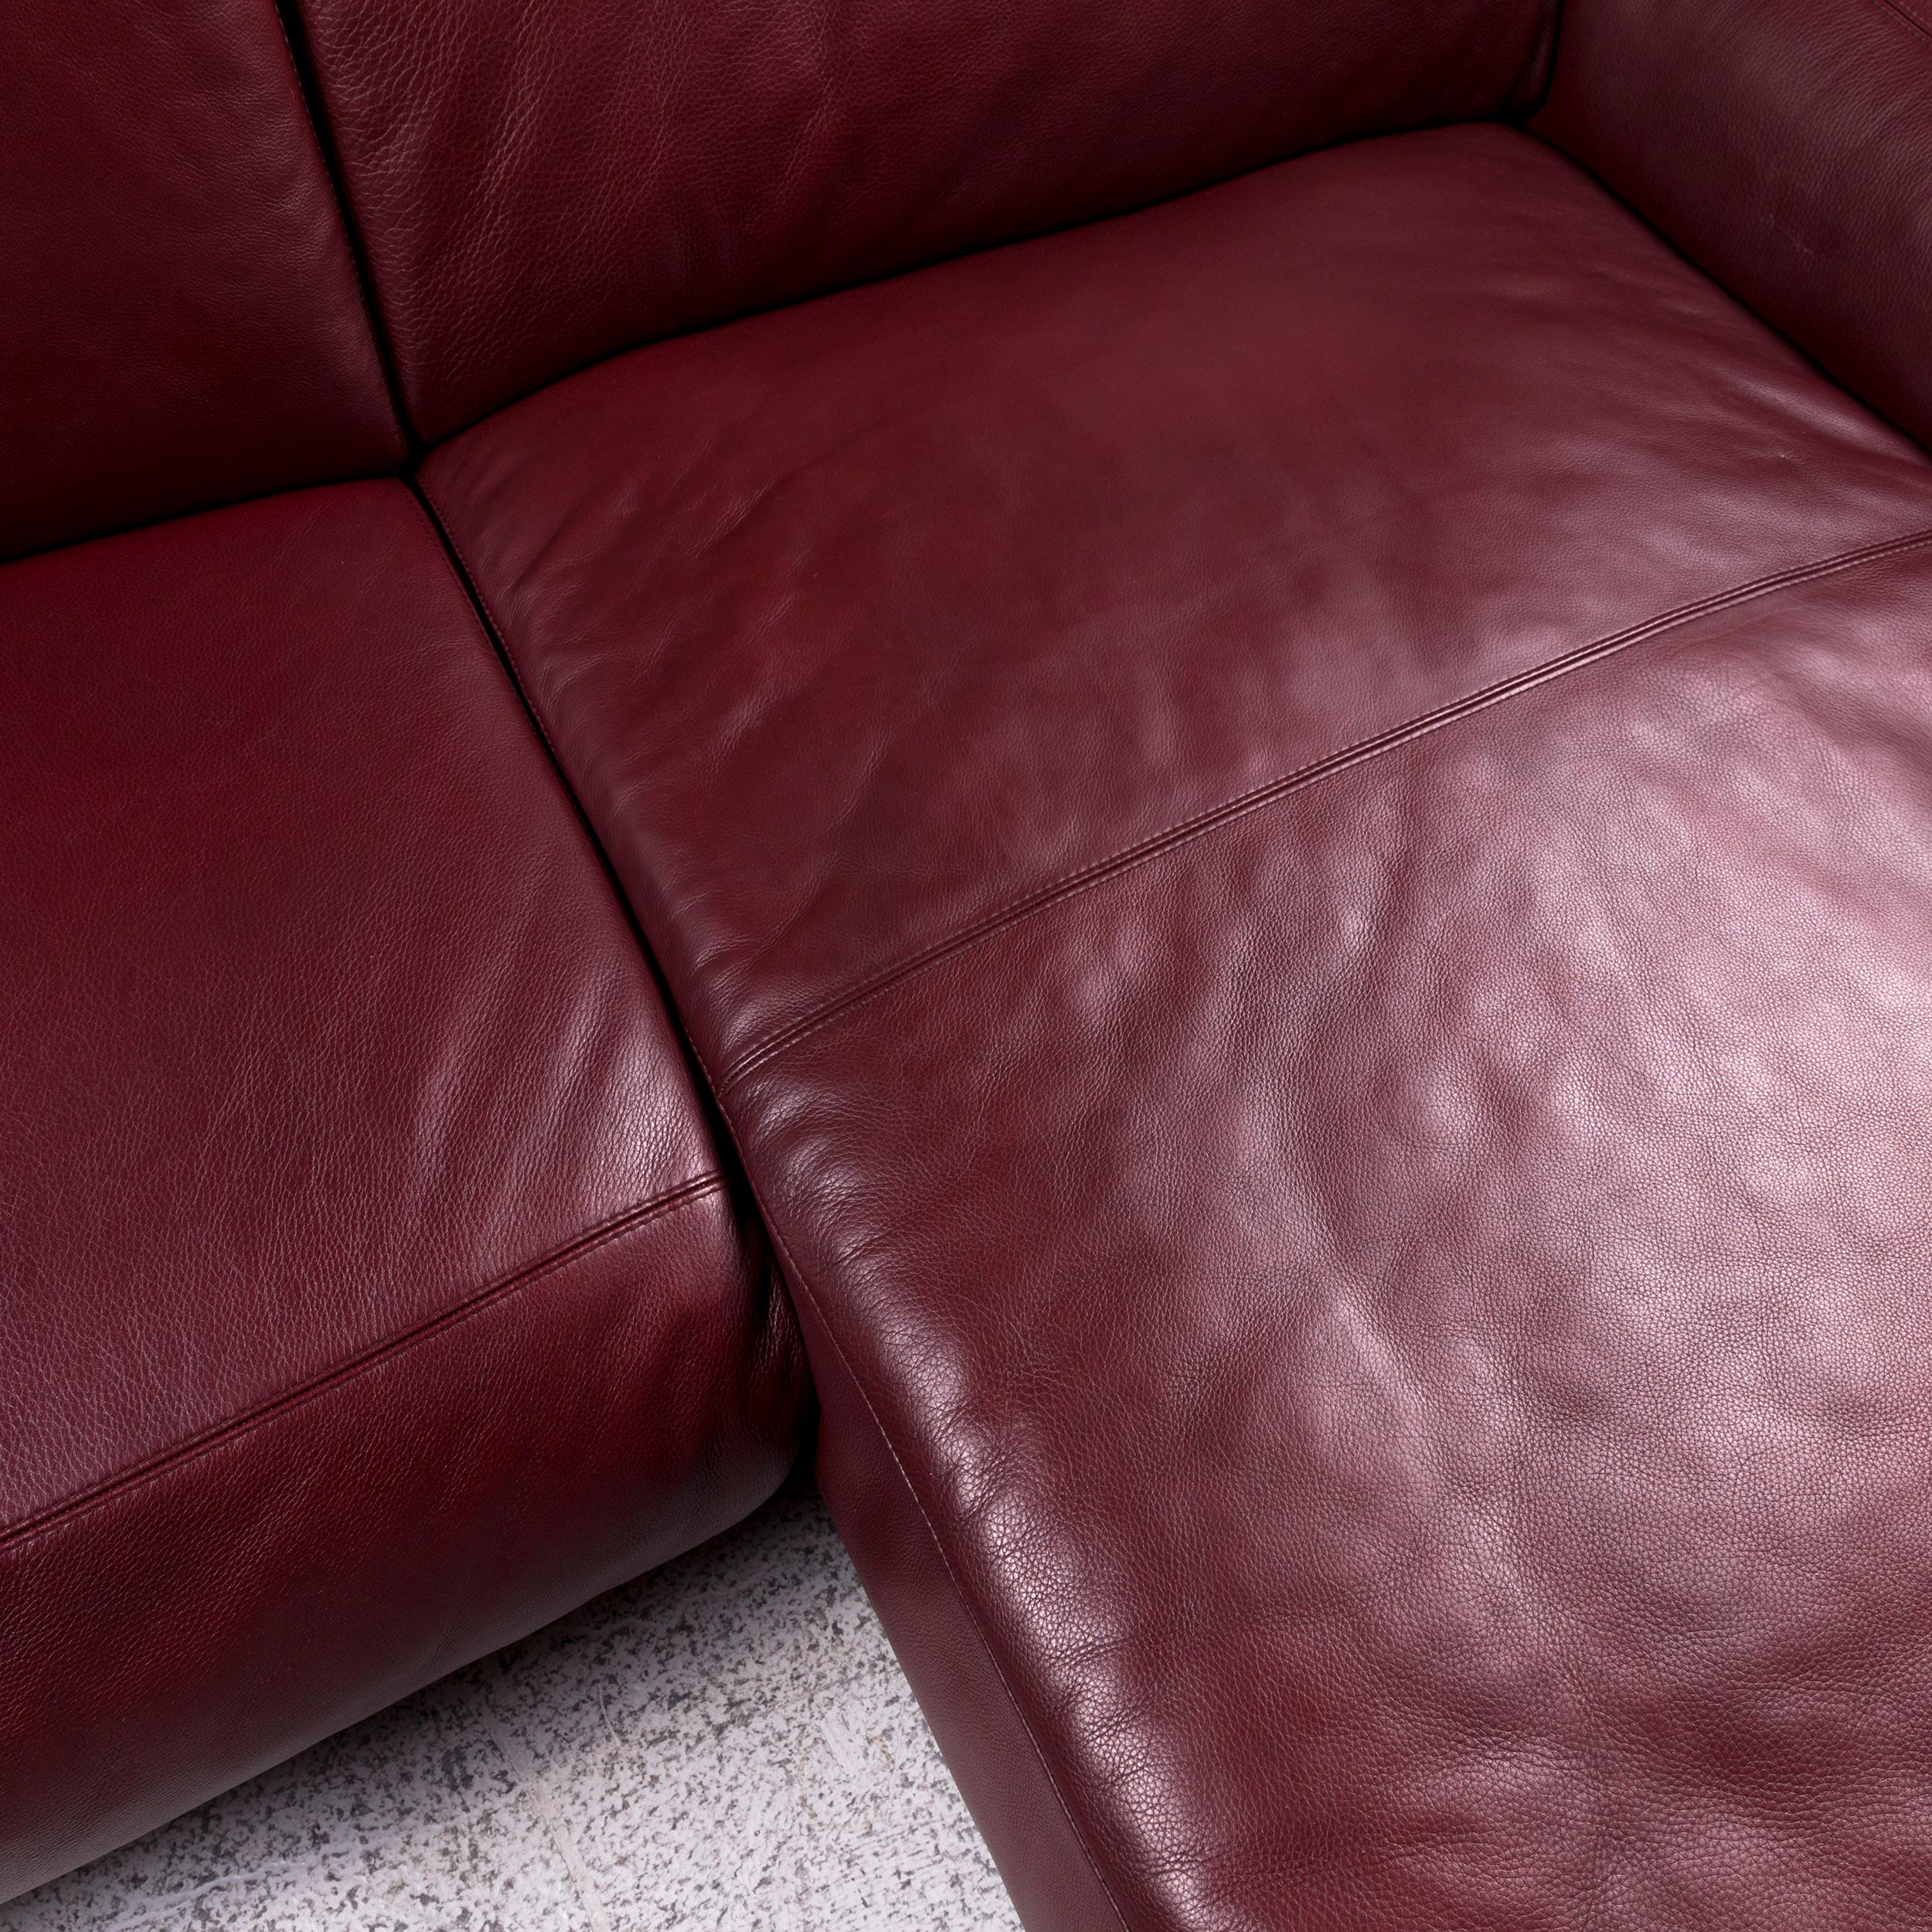 Modern Natuzzi Leather Corner Sofa Bordeaux Red Sofa Couch For Sale